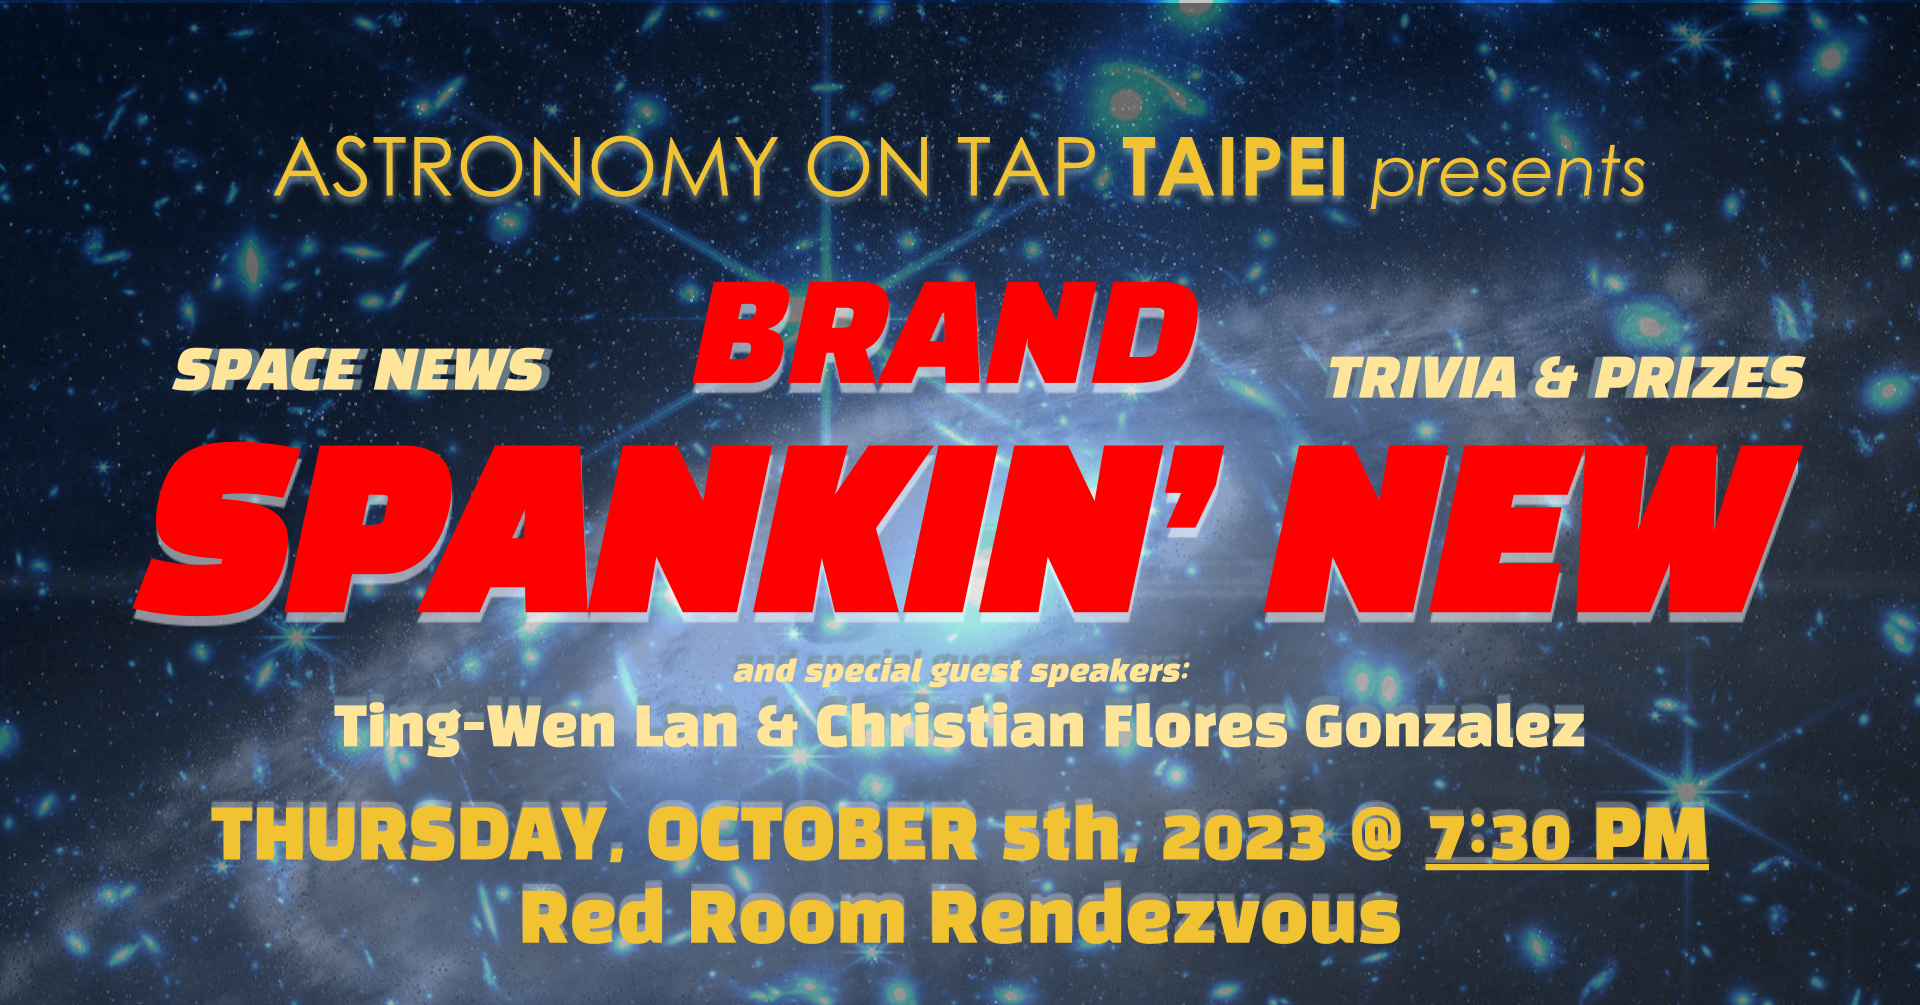 AoT Taipei: Brand Spankin' New. Join us on Thursday 5th October at 7:30pm in Red Room Rendezvous, Taipei.